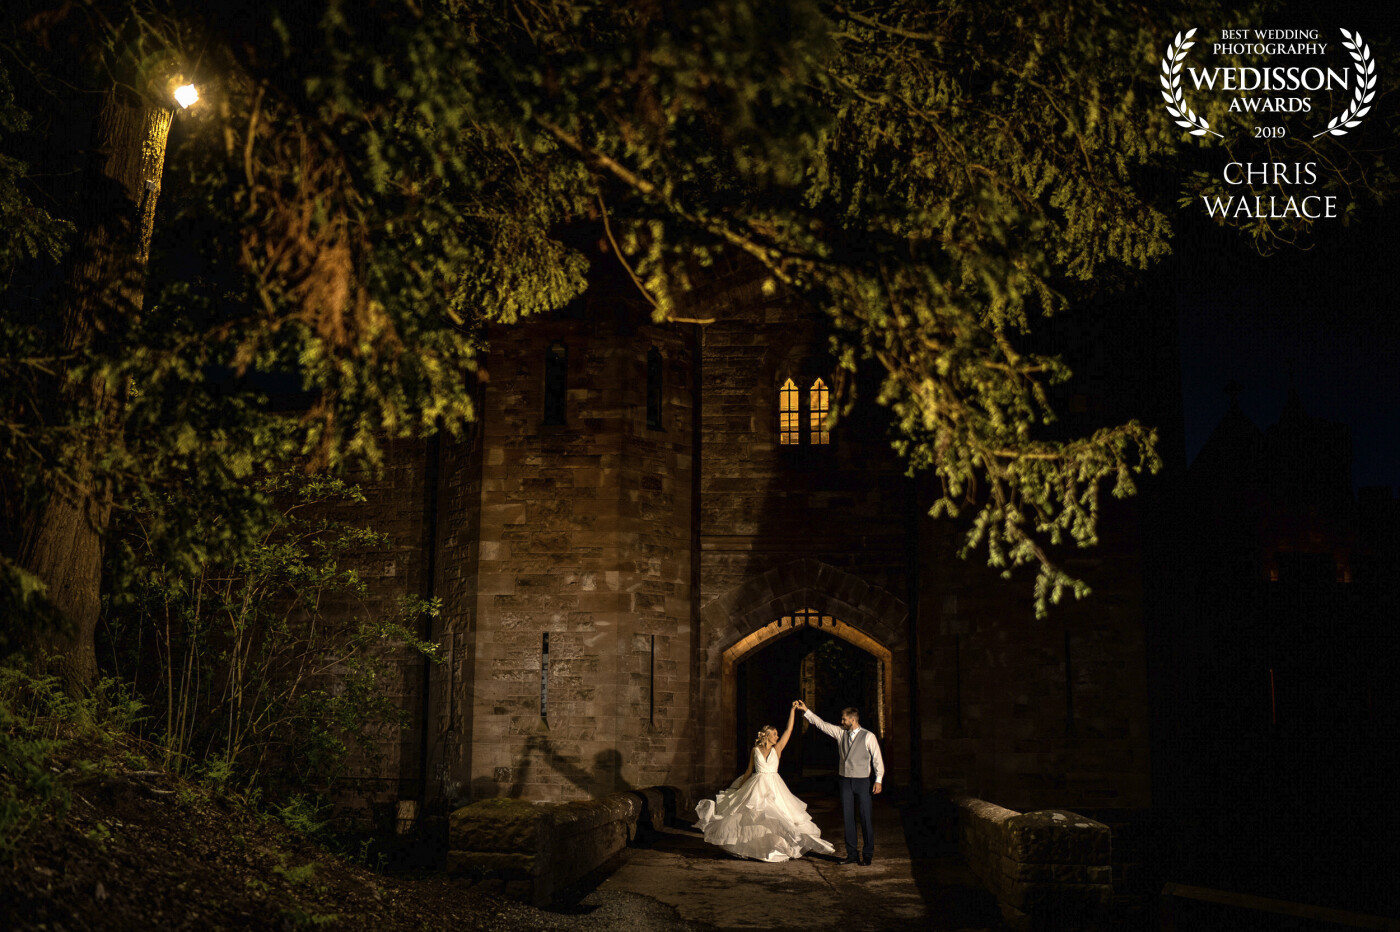 That time when you head out after the wedding celebrations into the dark to create something special! Taken at Peckforton Castle, Cheshire. 